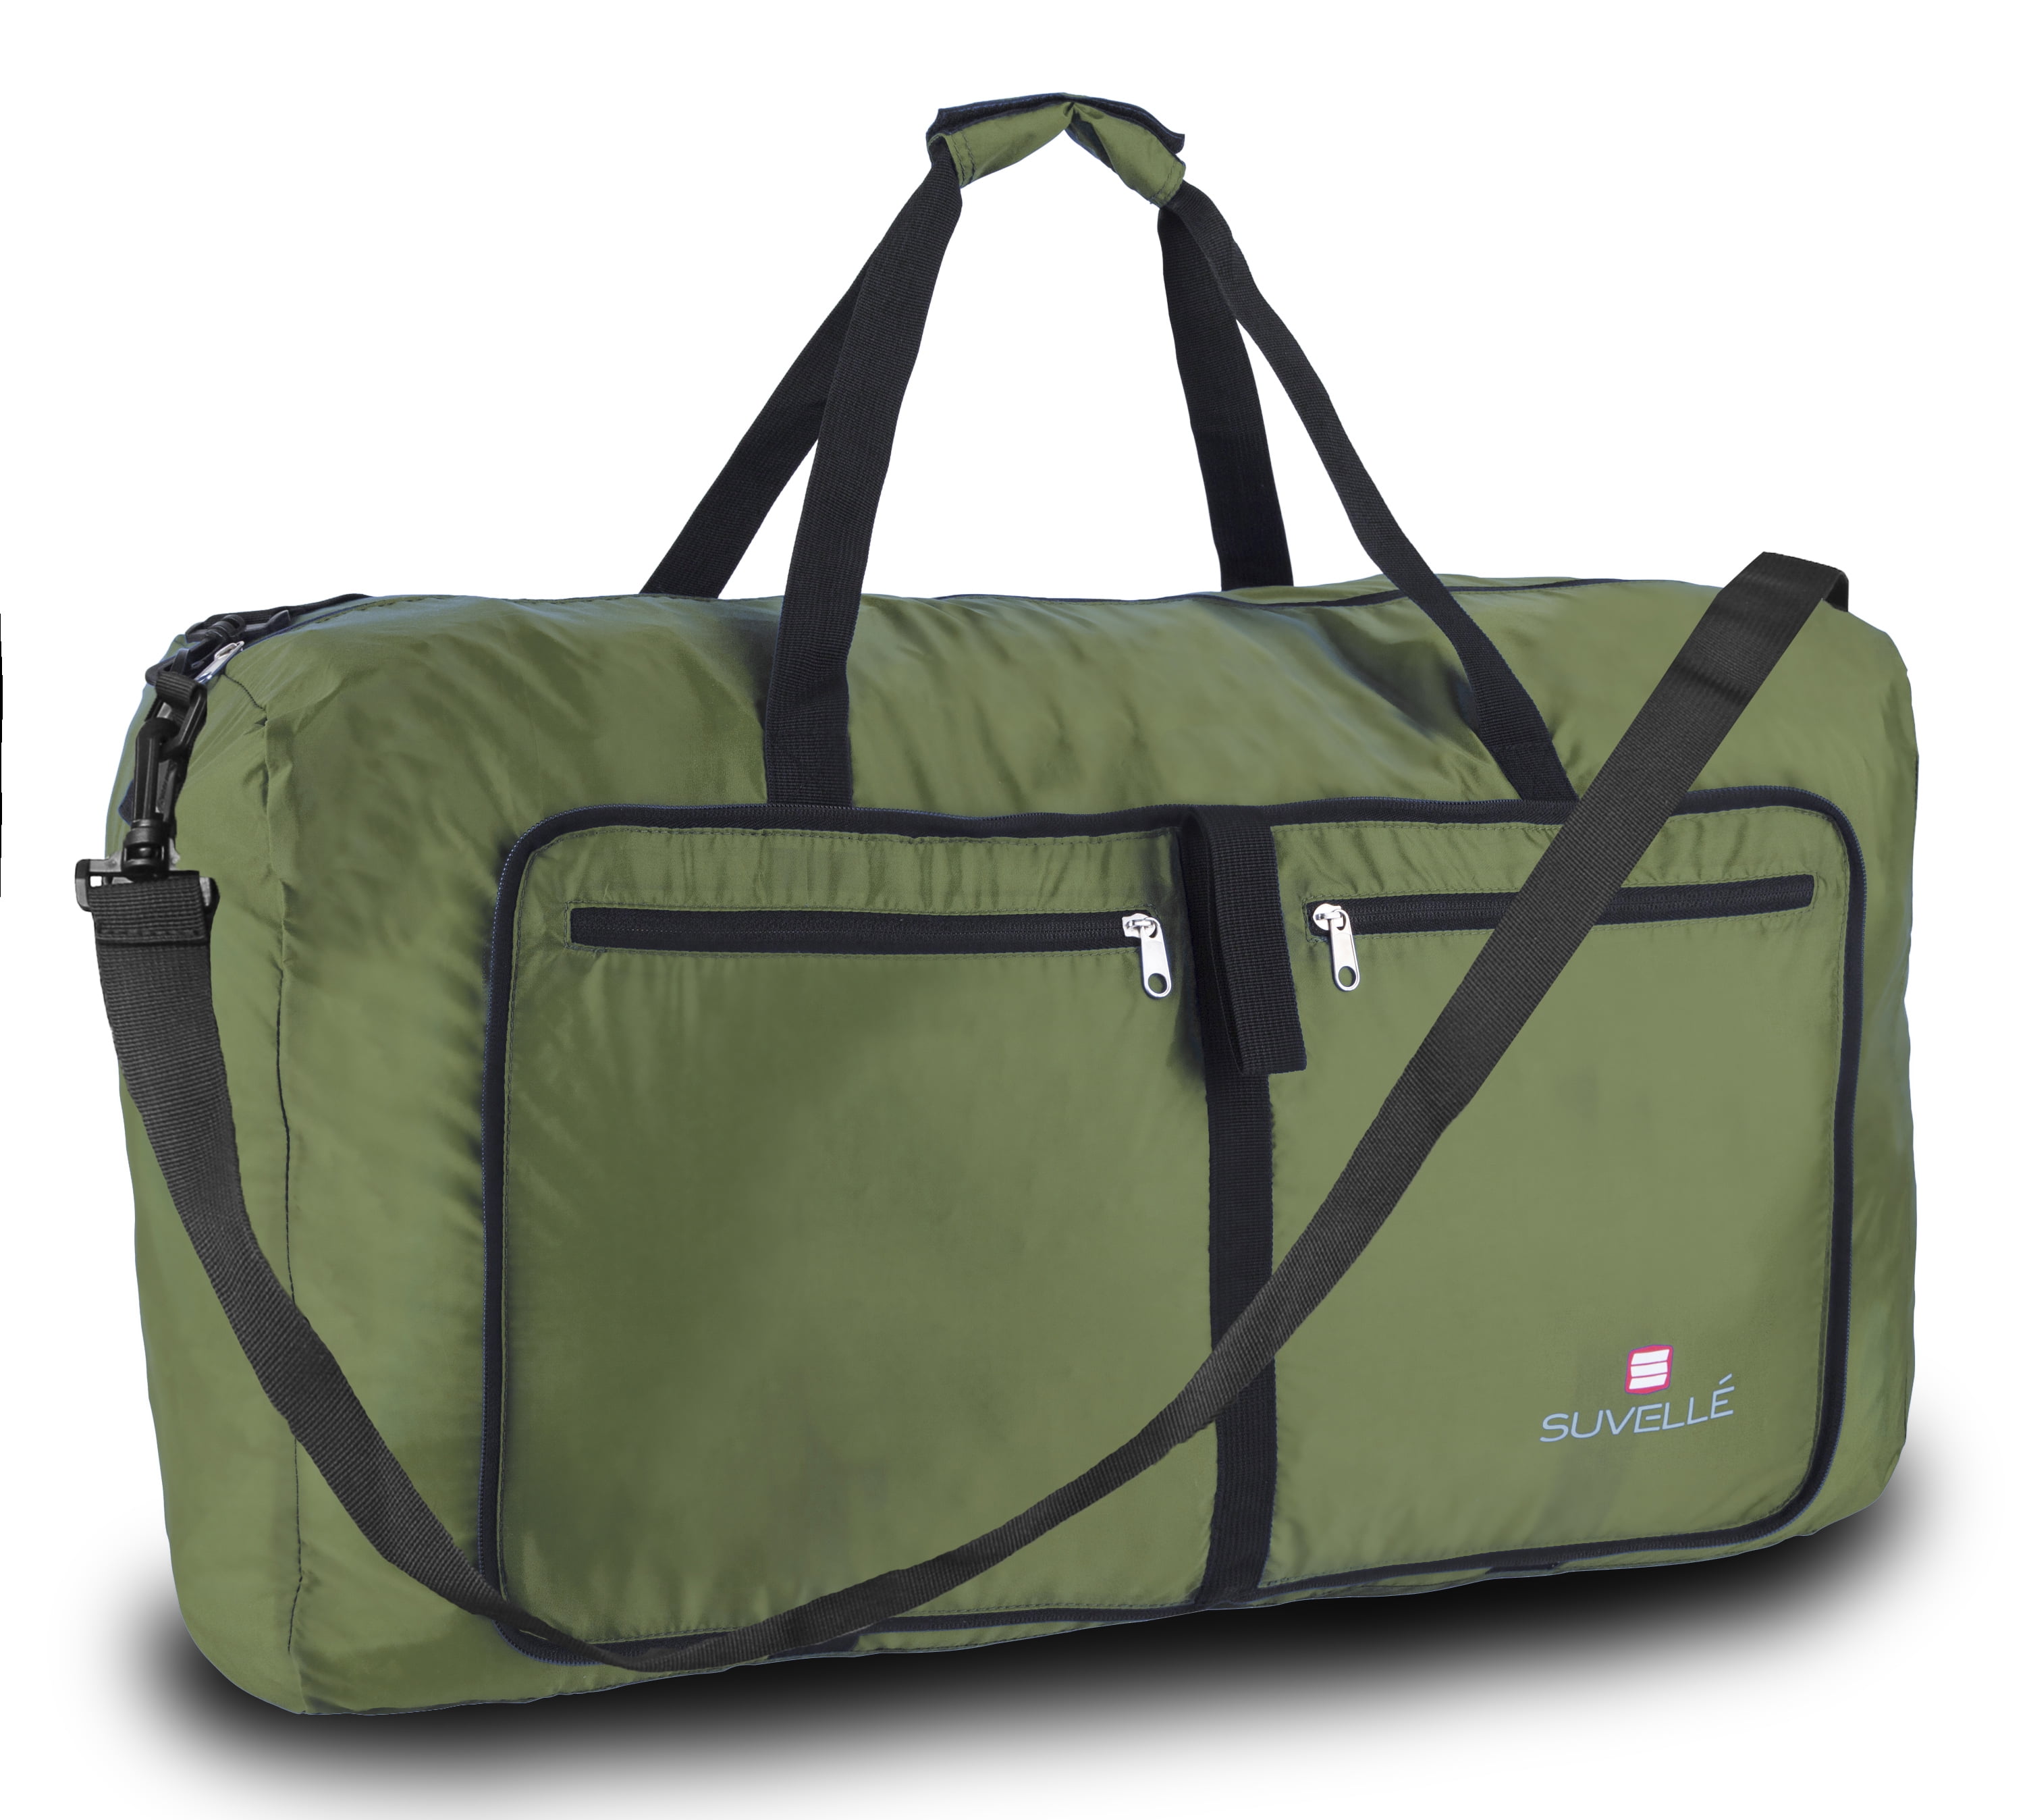 Suvelle Lightweight 29&quot; Travel Foldable Duffel Bag For Luggage Gym Sports Water Resistant Nylon ...